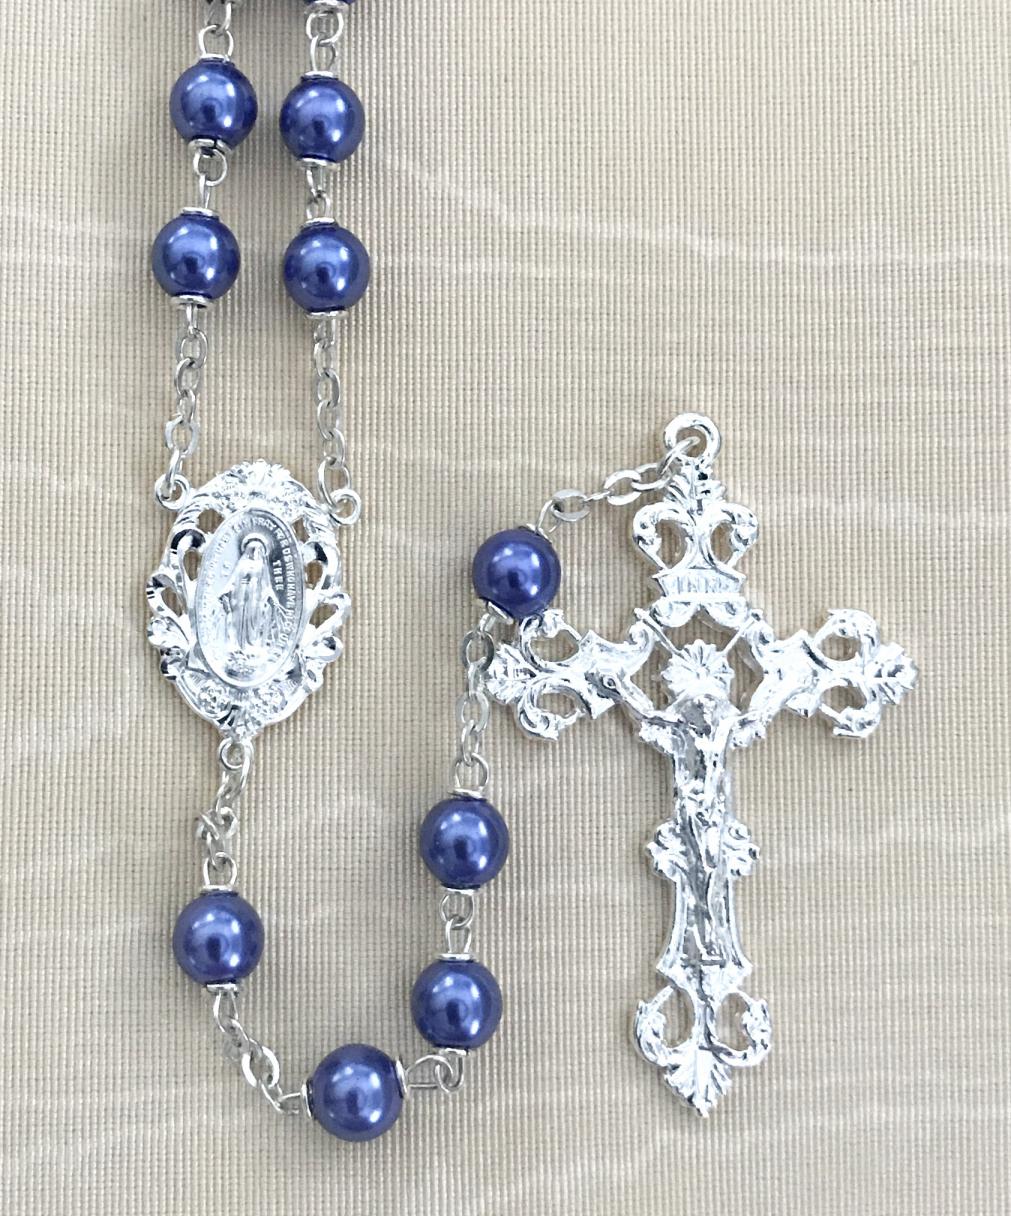 7mm ROUND PURPLE PEARL ROSARY WITH STERLING SILVER PLATED CRUCIFIX AND CENTER GIFT BOXED